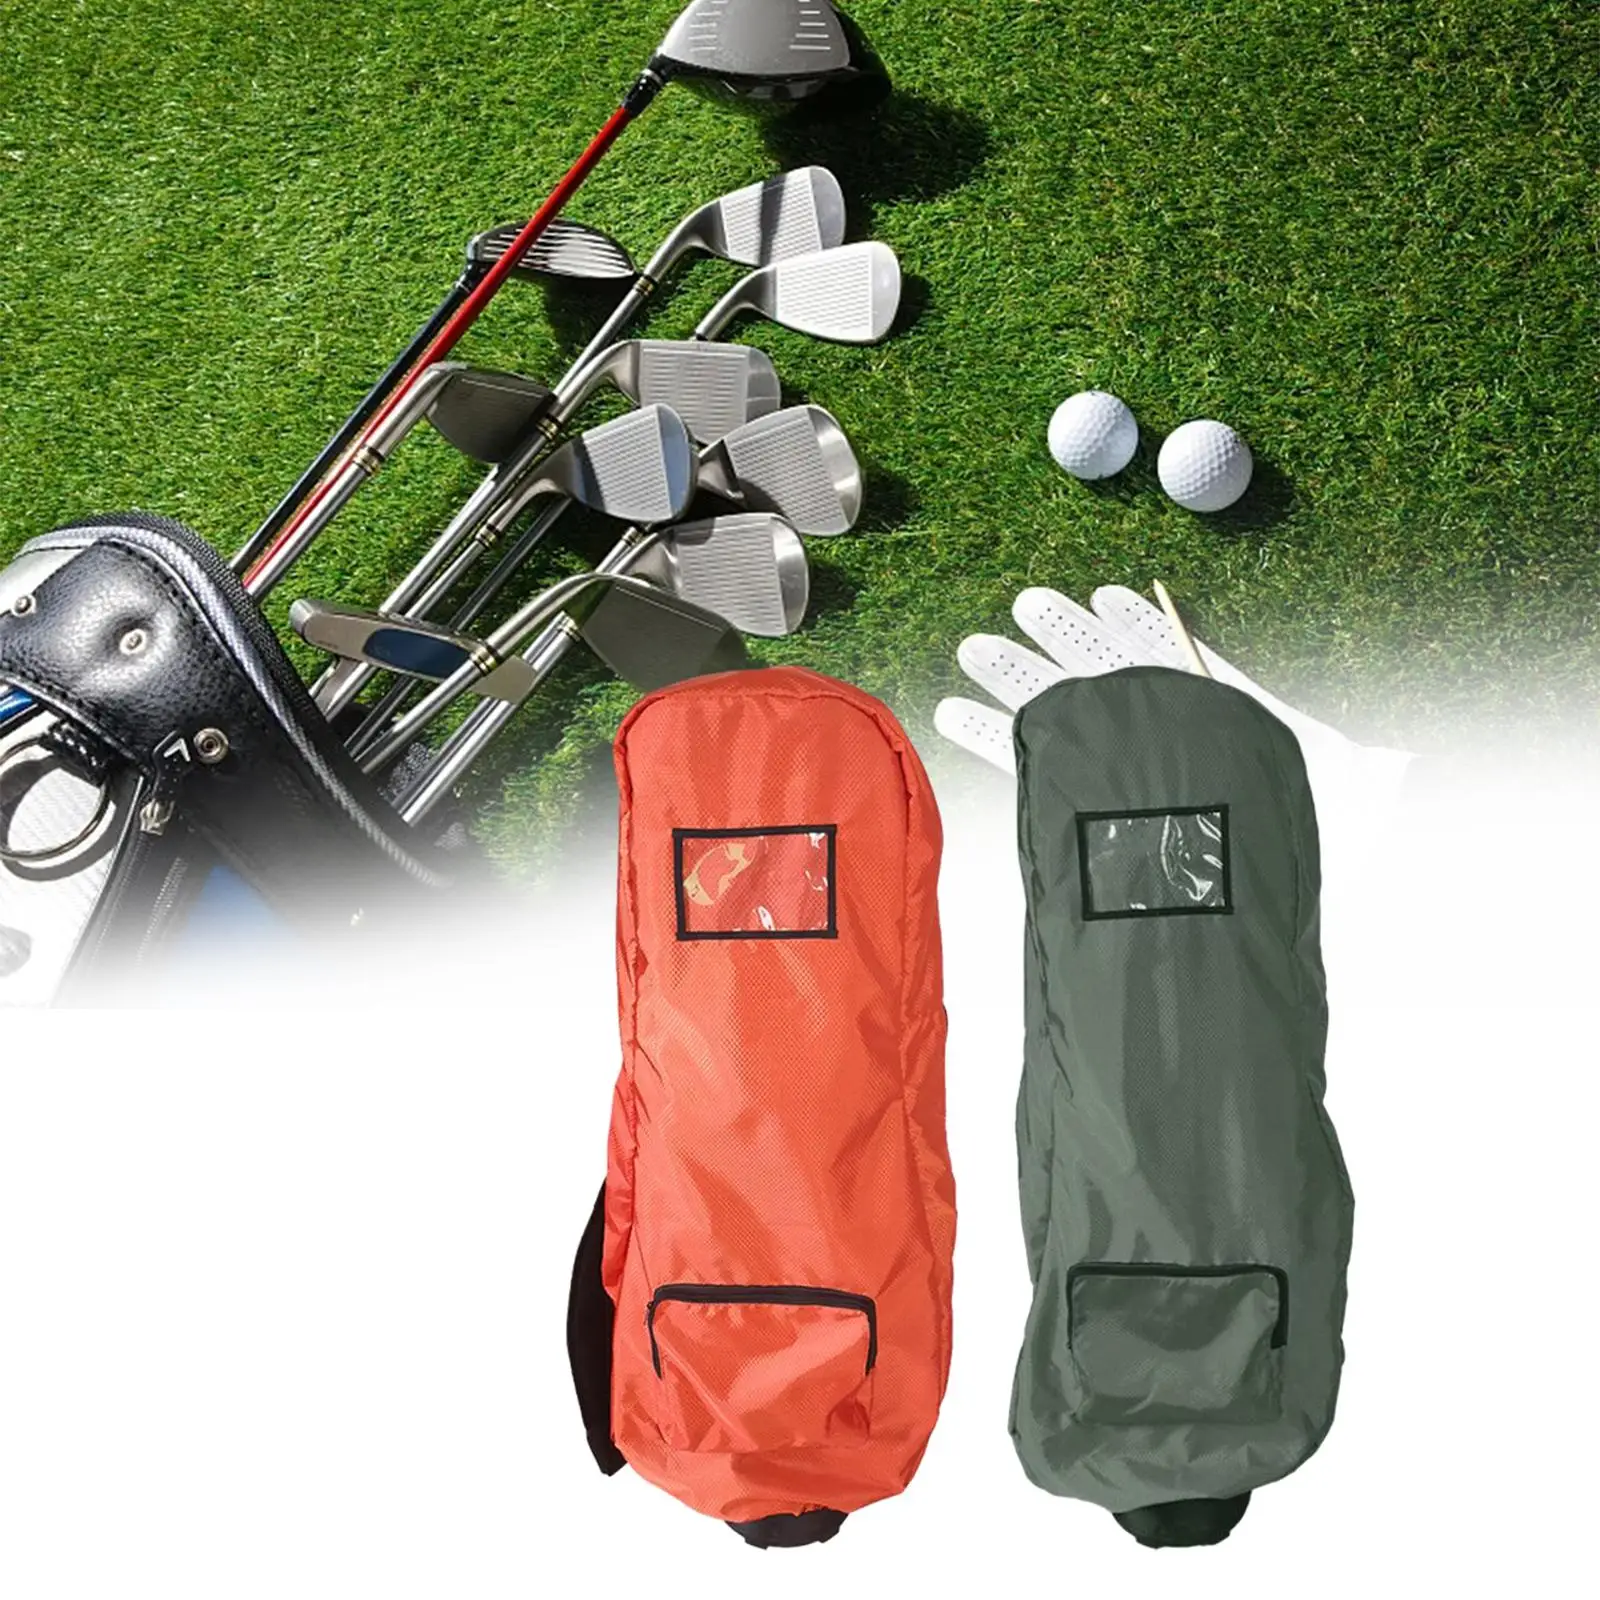 Golf Bag Rain Cover Club Cases Dustproof Pouch Rain Protection Cover for Driving Range Golf Push Carts Outdoor Travel Golf Clubs